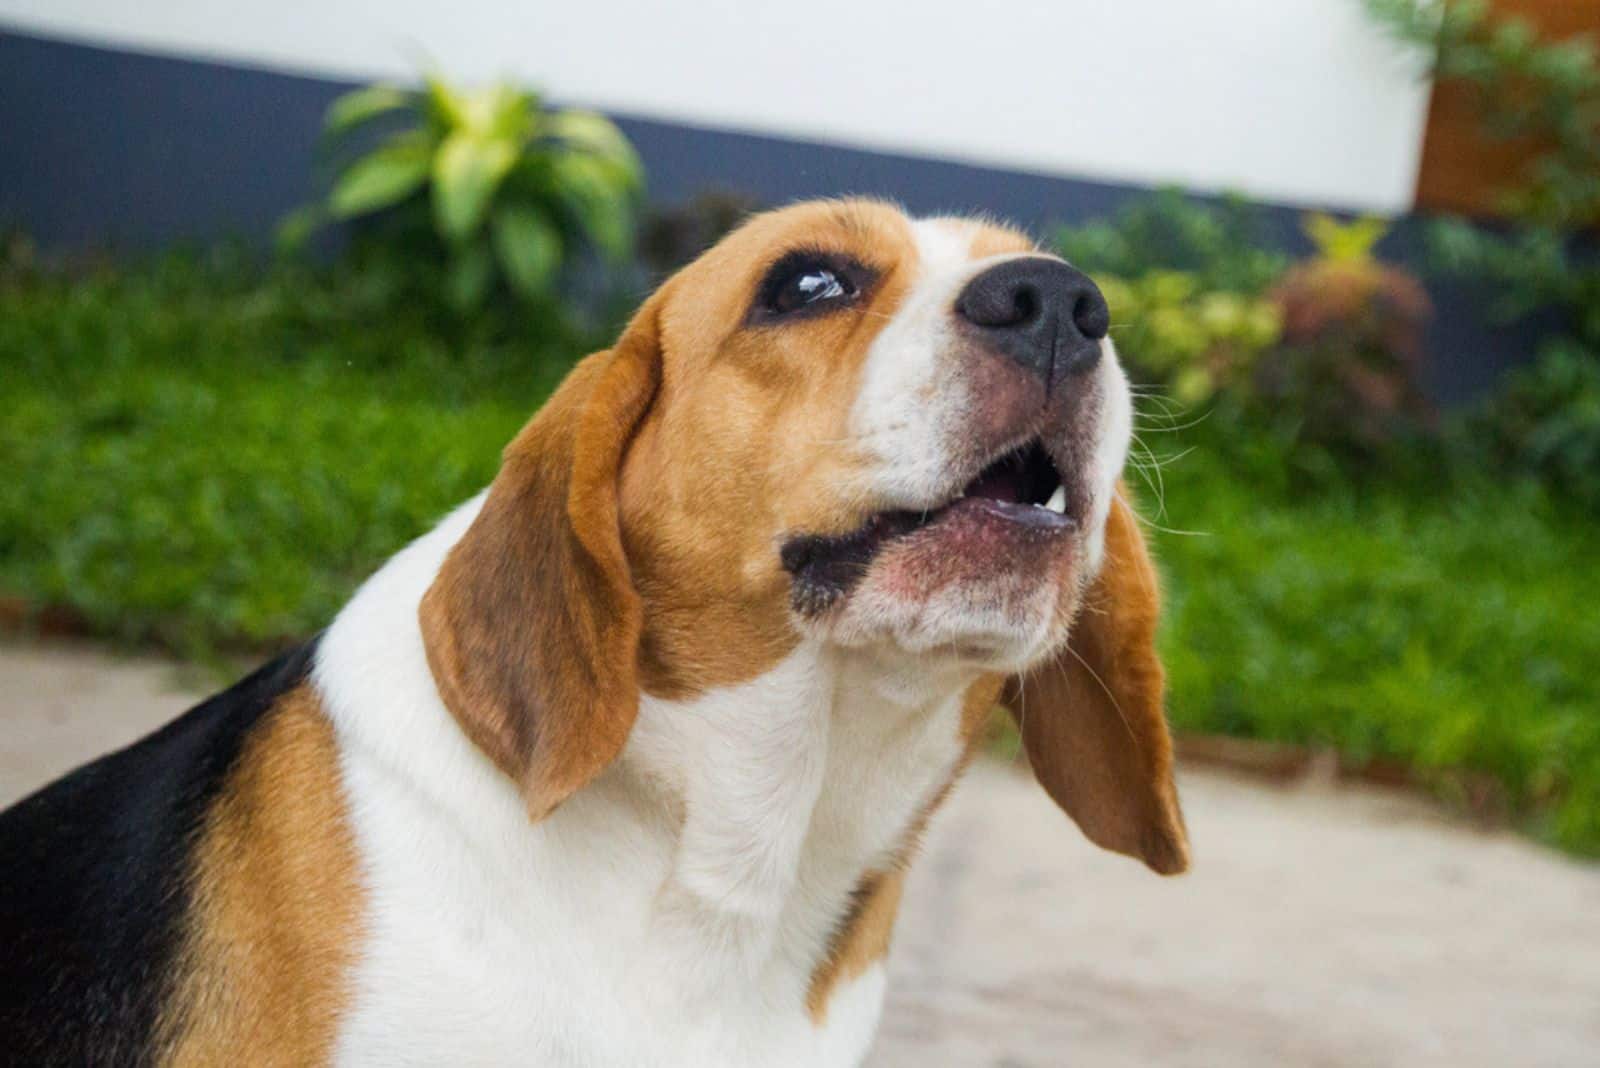 healthy beagle dogs are sitting and whining